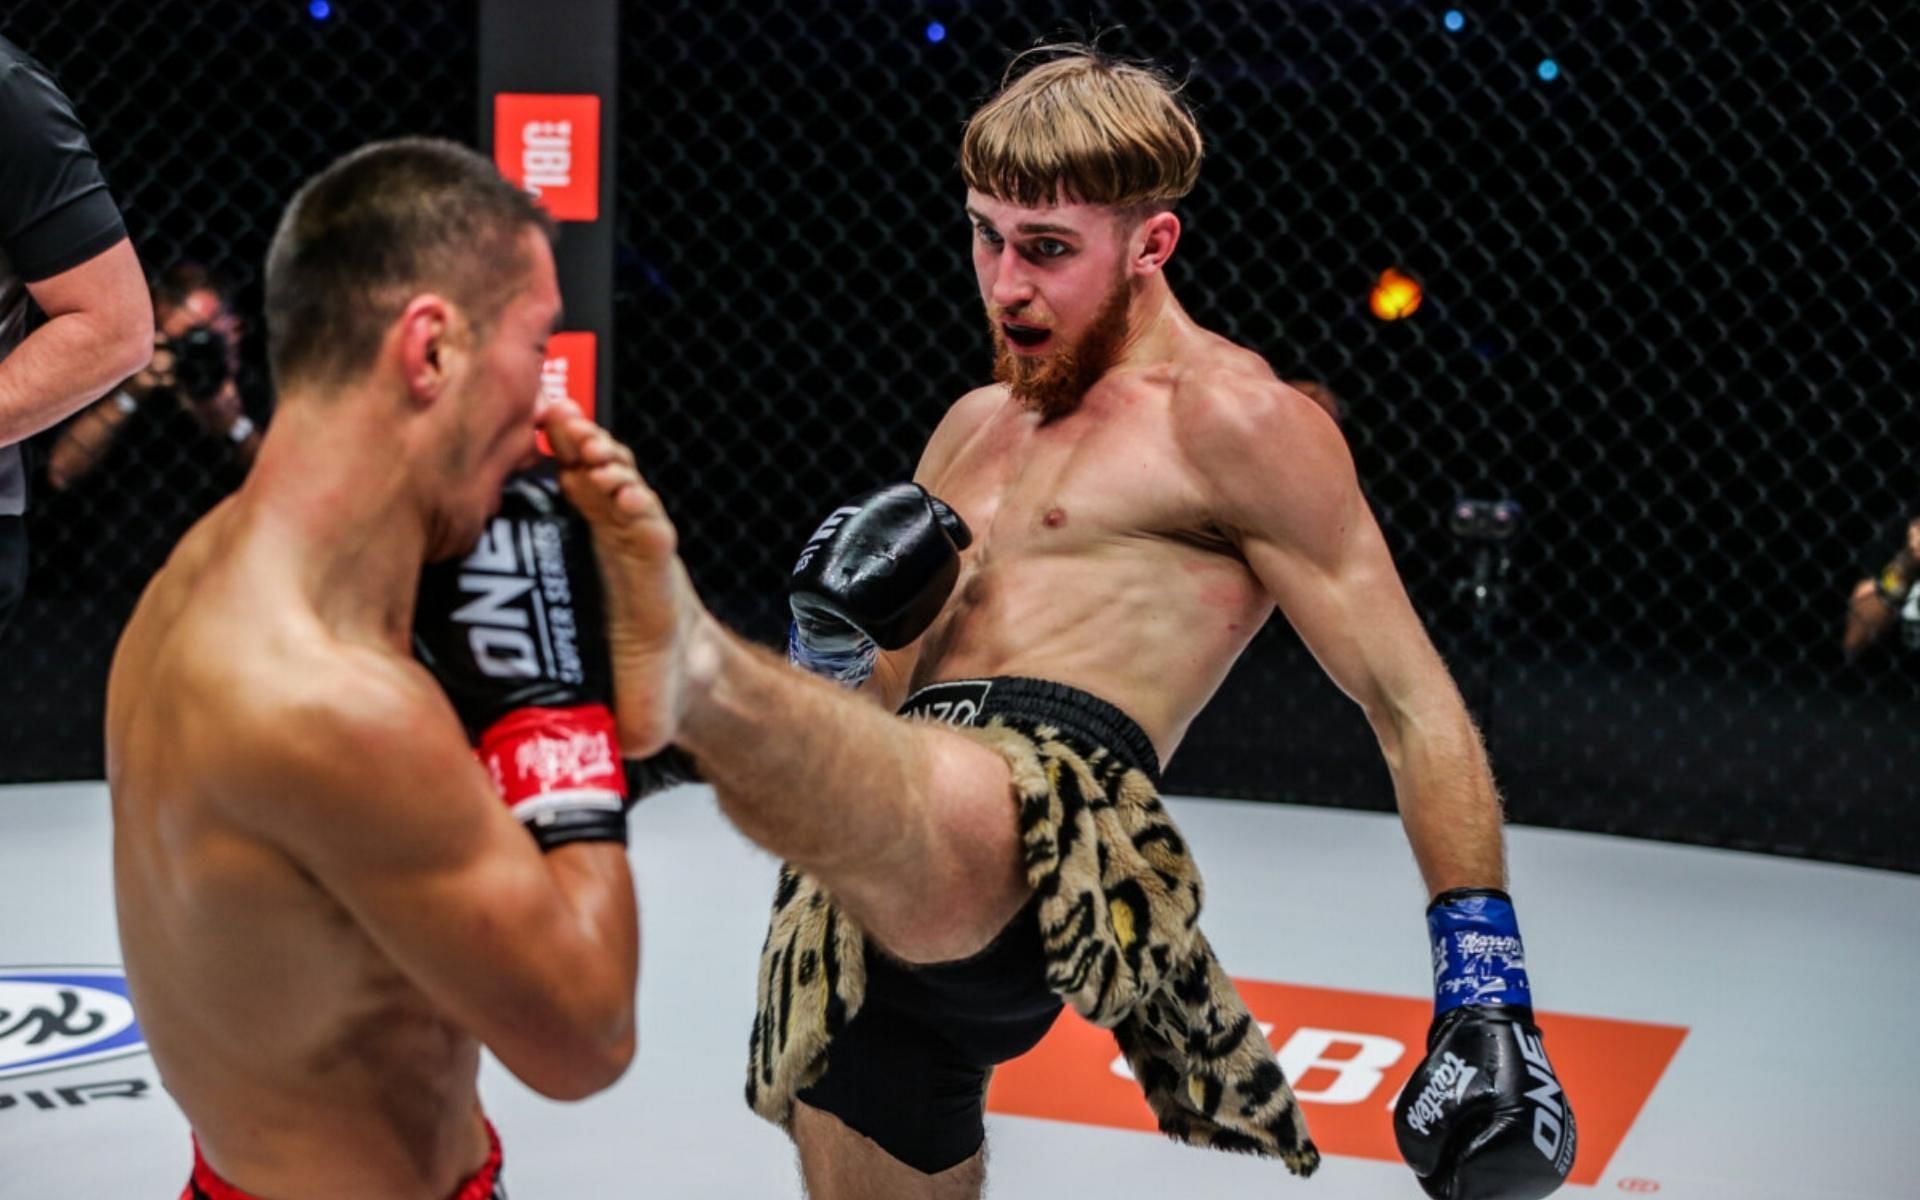 ONE Championship featherweight kickboxer Dovydas Rimkus (right) is a sight to behold every time he enters the Circle. (Image courtesy of ONE Championship)